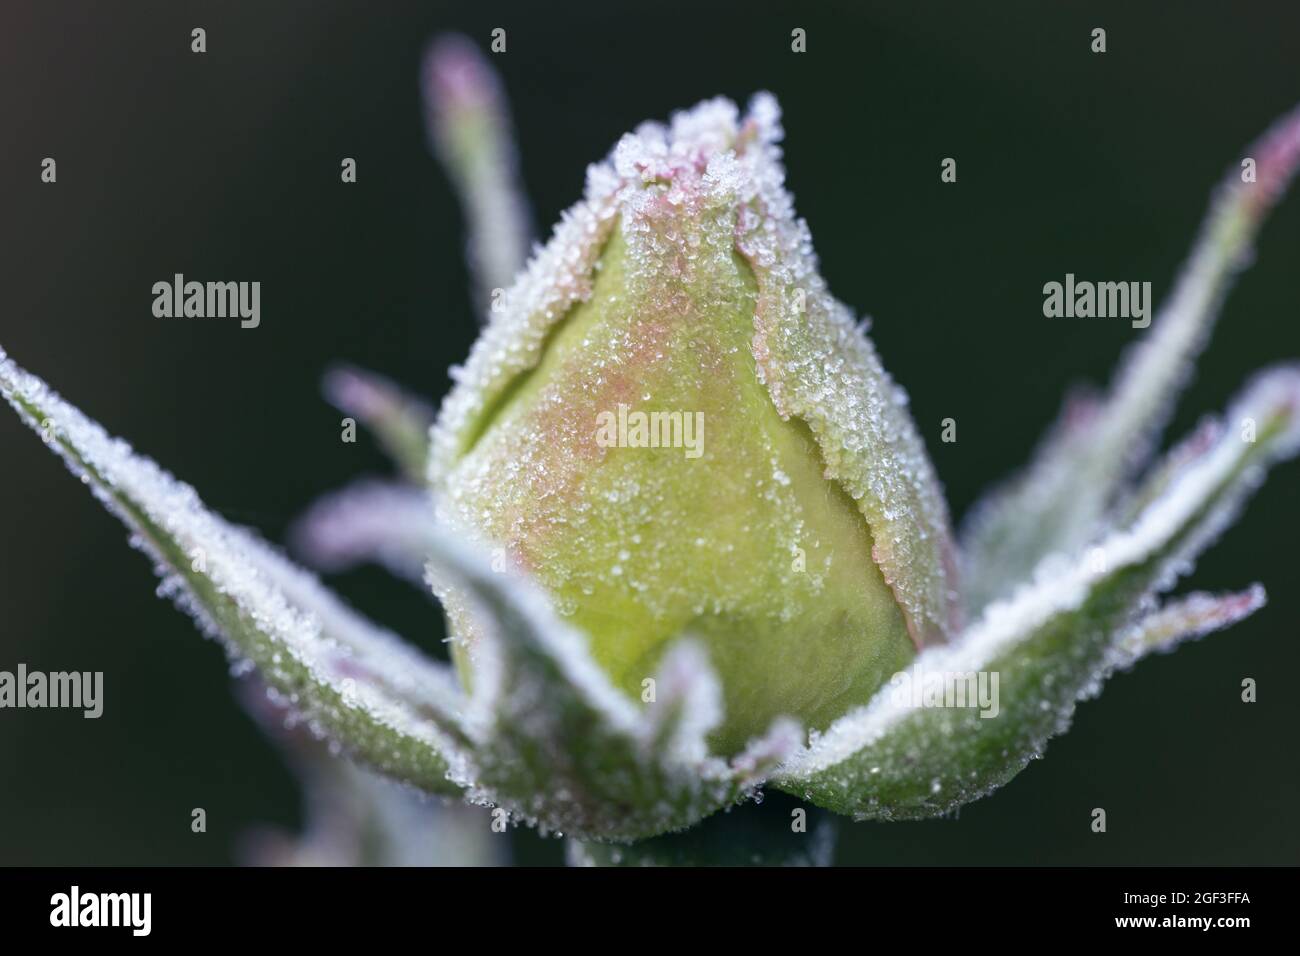 Winter in the garden. Hoarfrost on the petals of a white rose Stock Photo